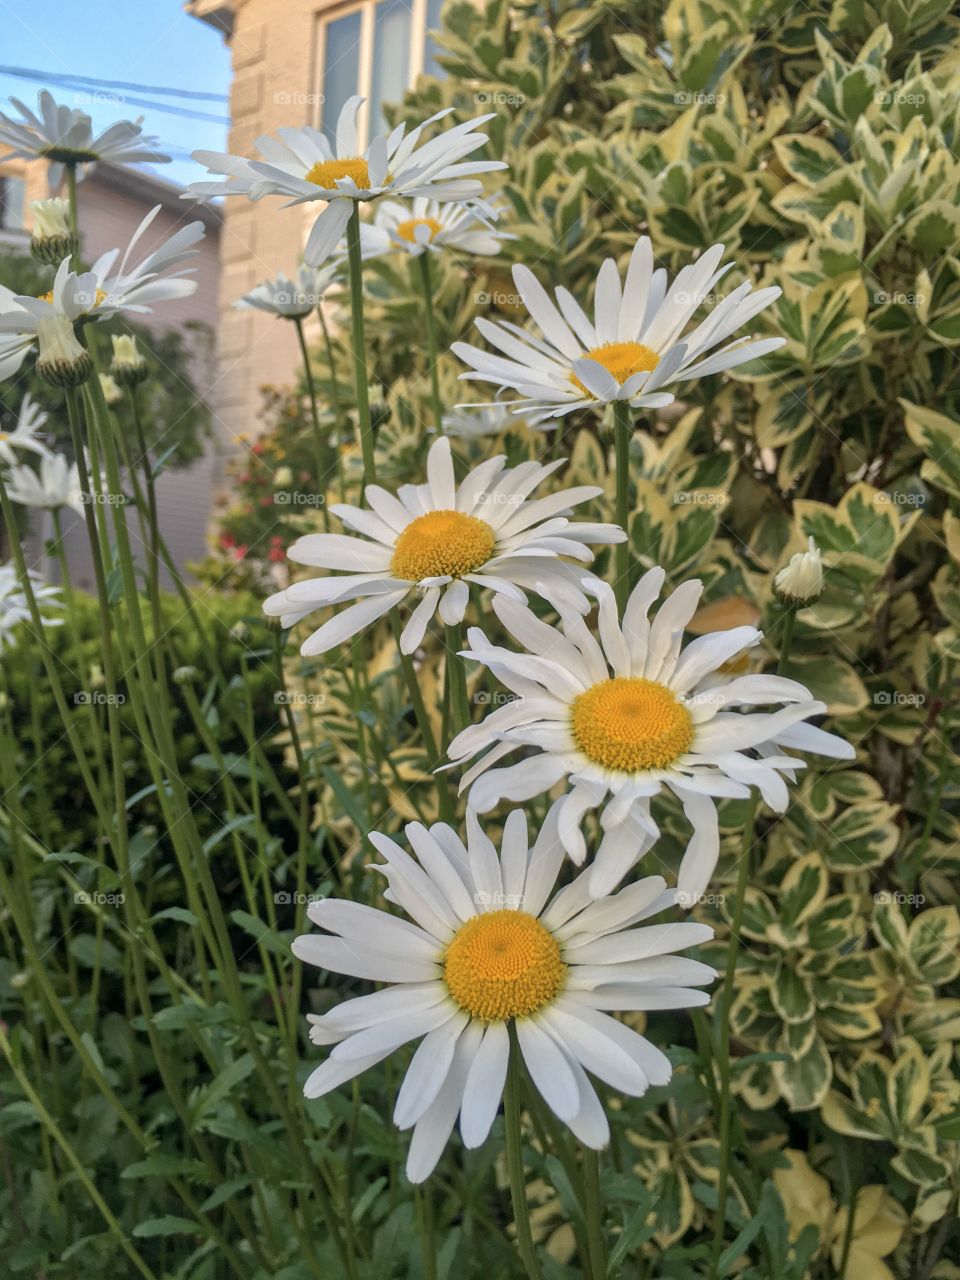 Beautiful flowers grown on my property 